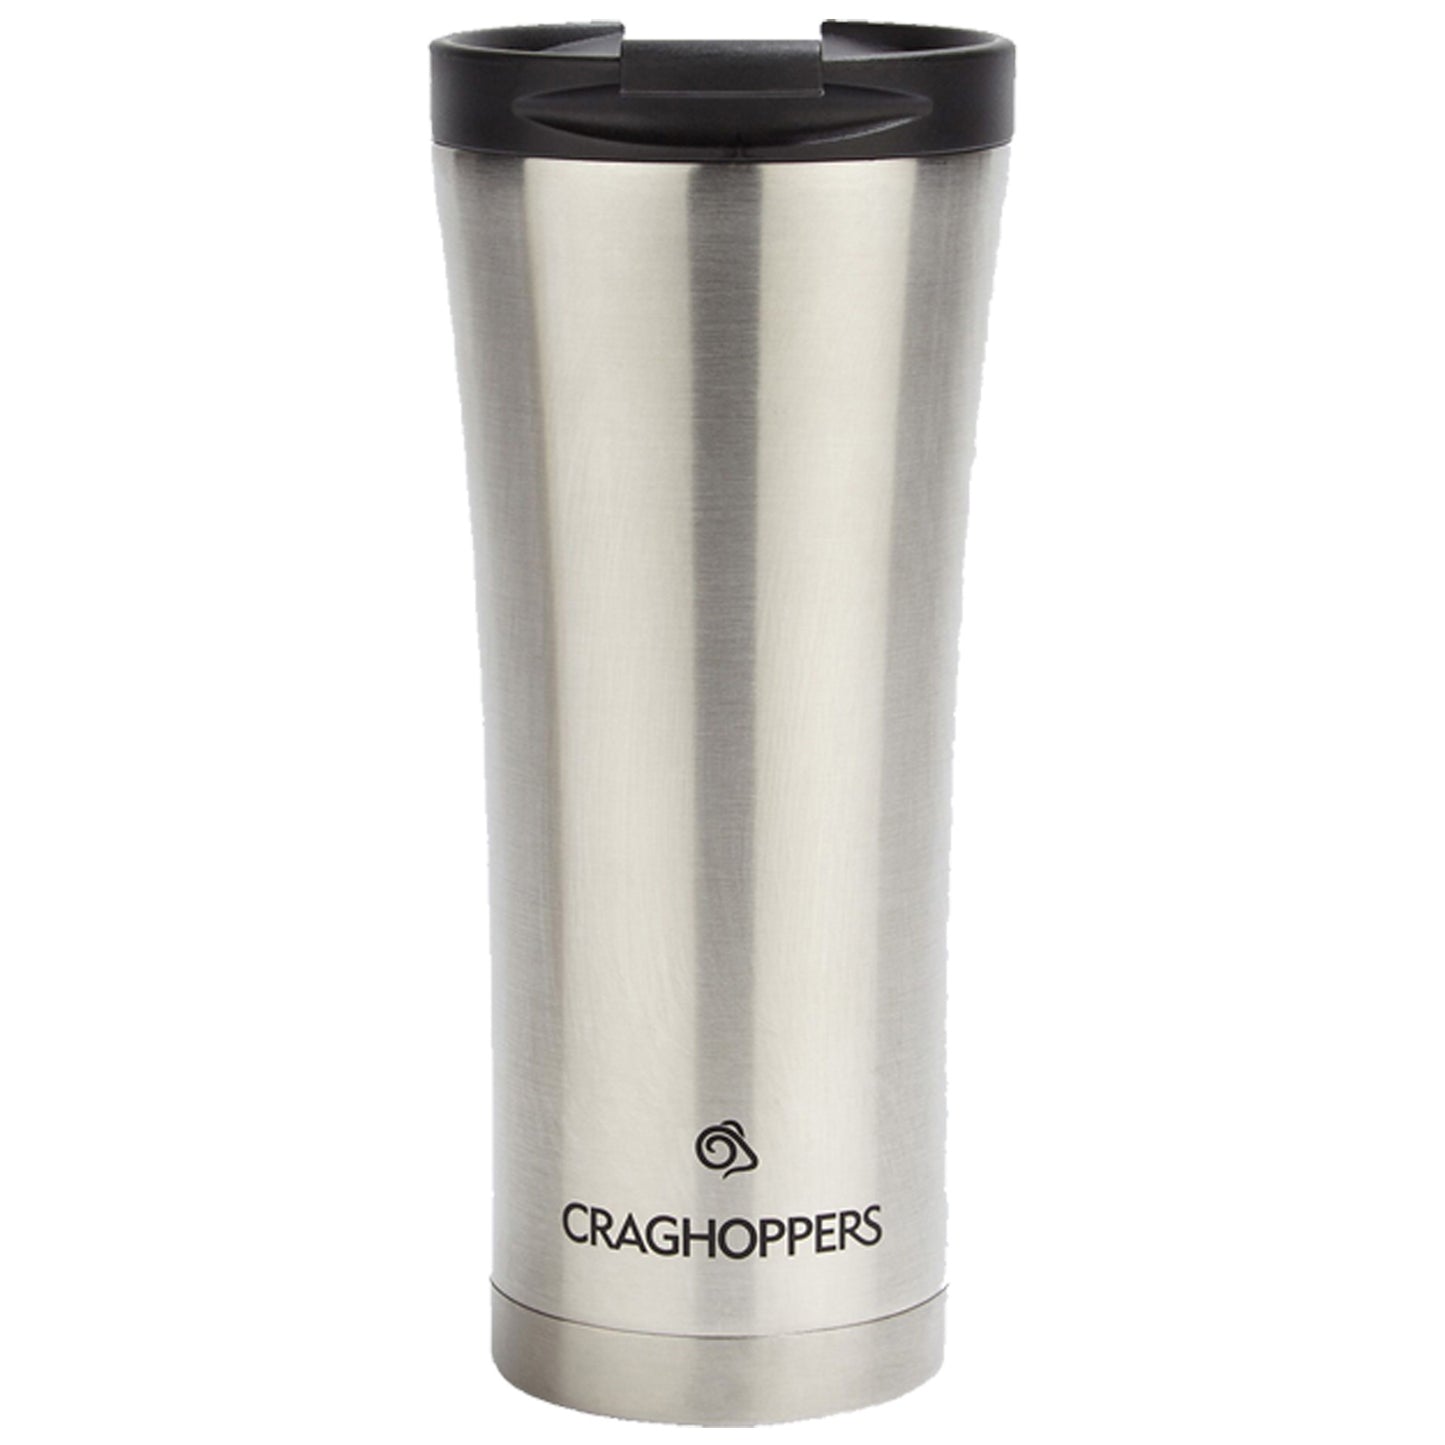 Craghoppers Ortier Beanie Hat & Insulated Tumbler Gift Set